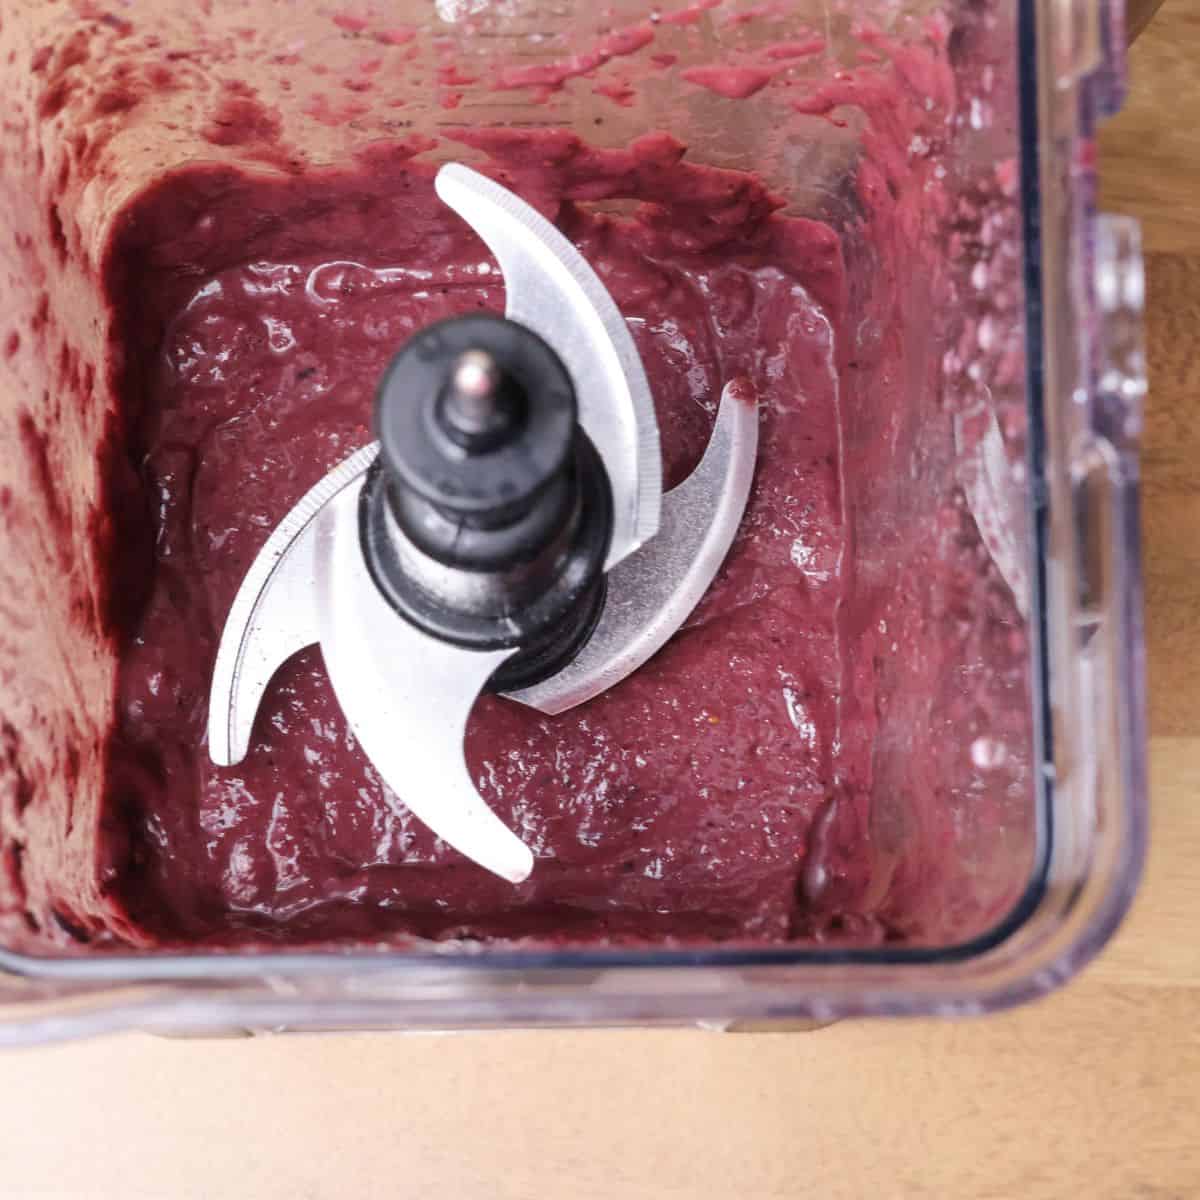 A top view of a blender containing a freshly blended açaí base, showing a smooth, purple mixture.